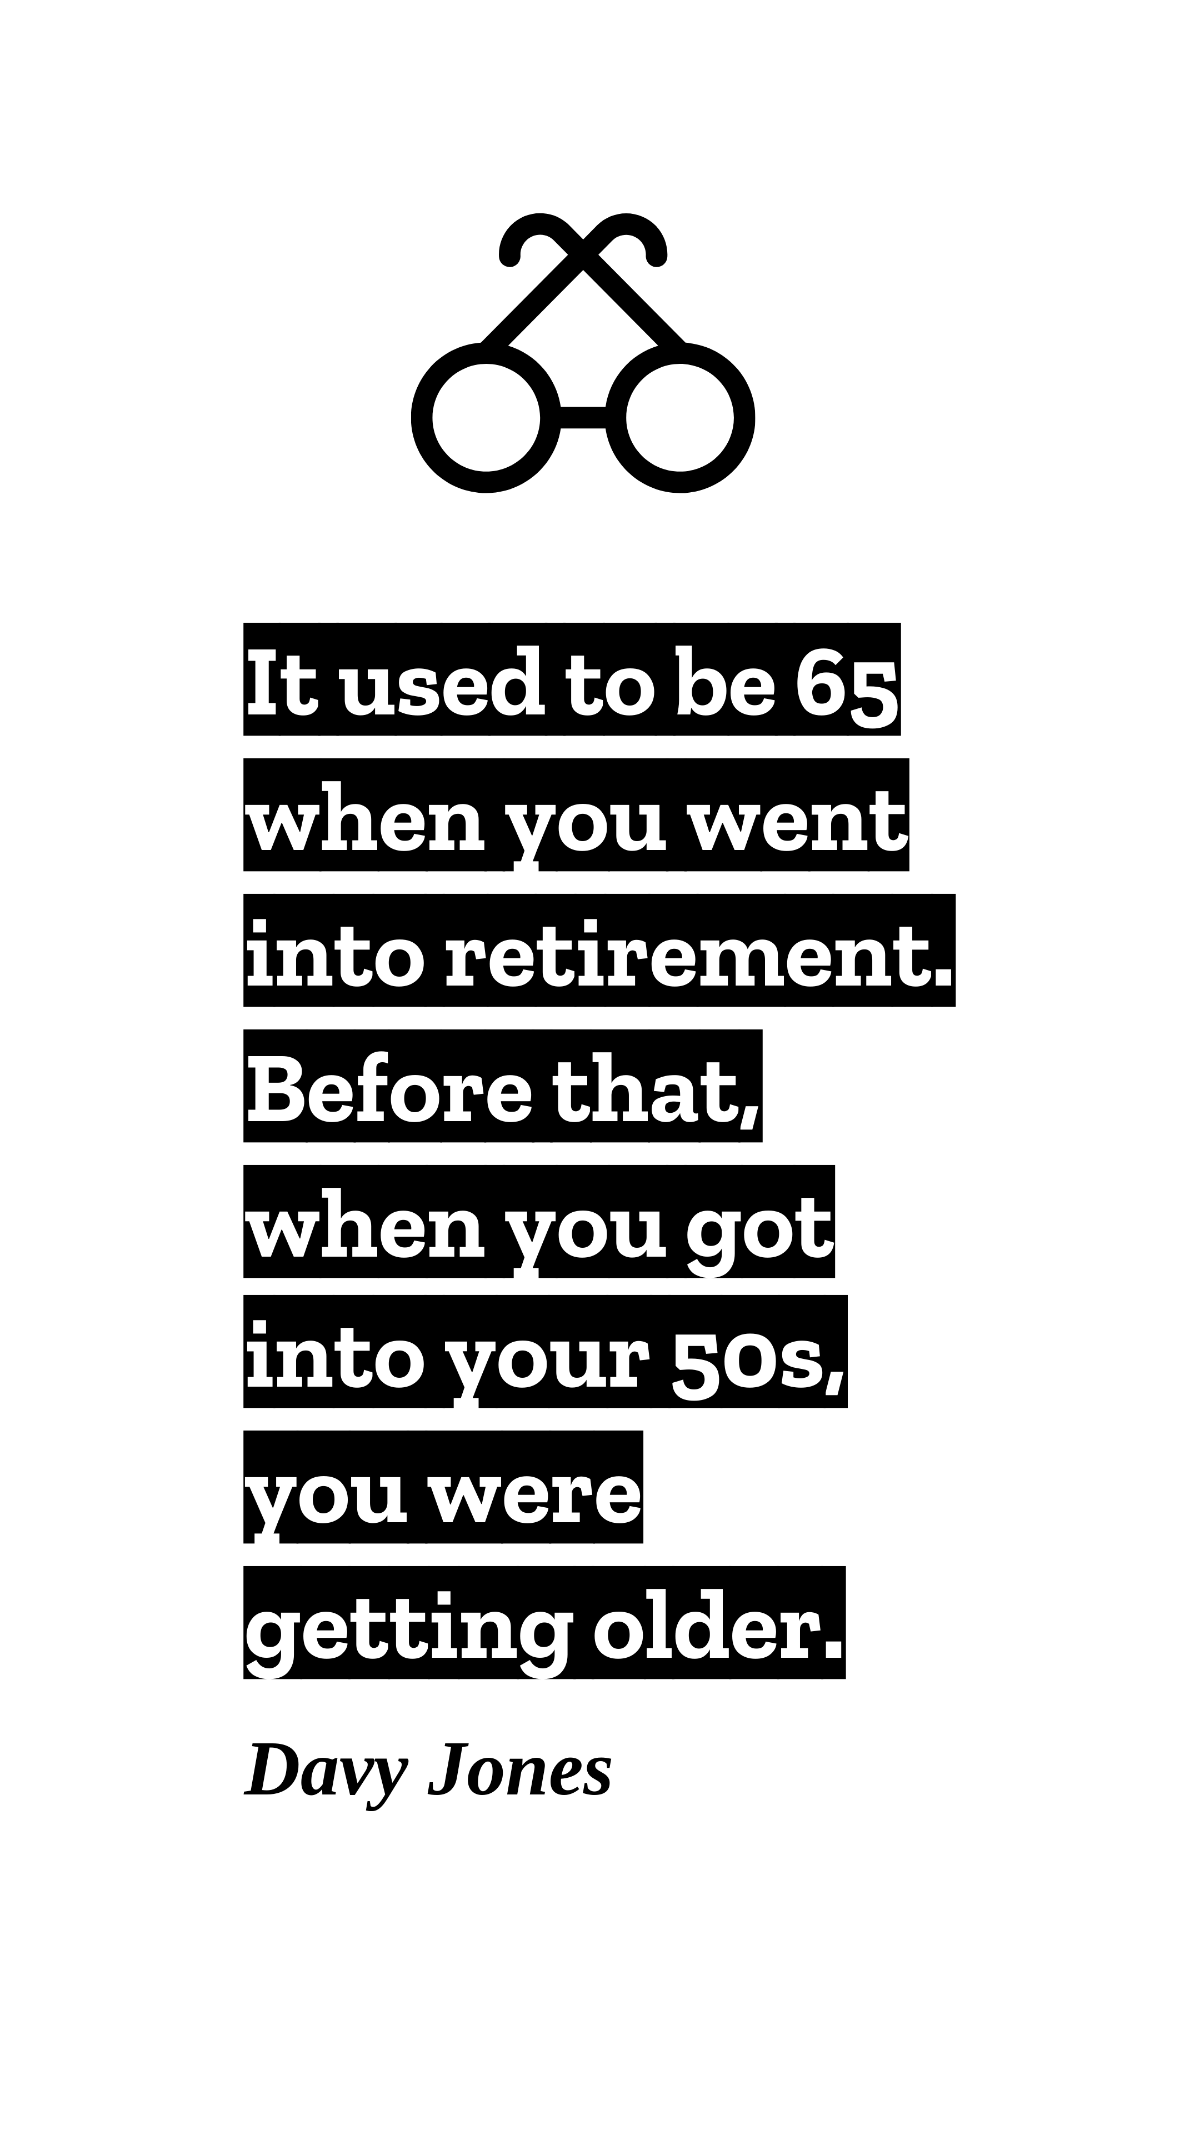 Davy Jones - It used to be 65 when you went into retirement. Before that, when you got into your 50s, you were getting older.